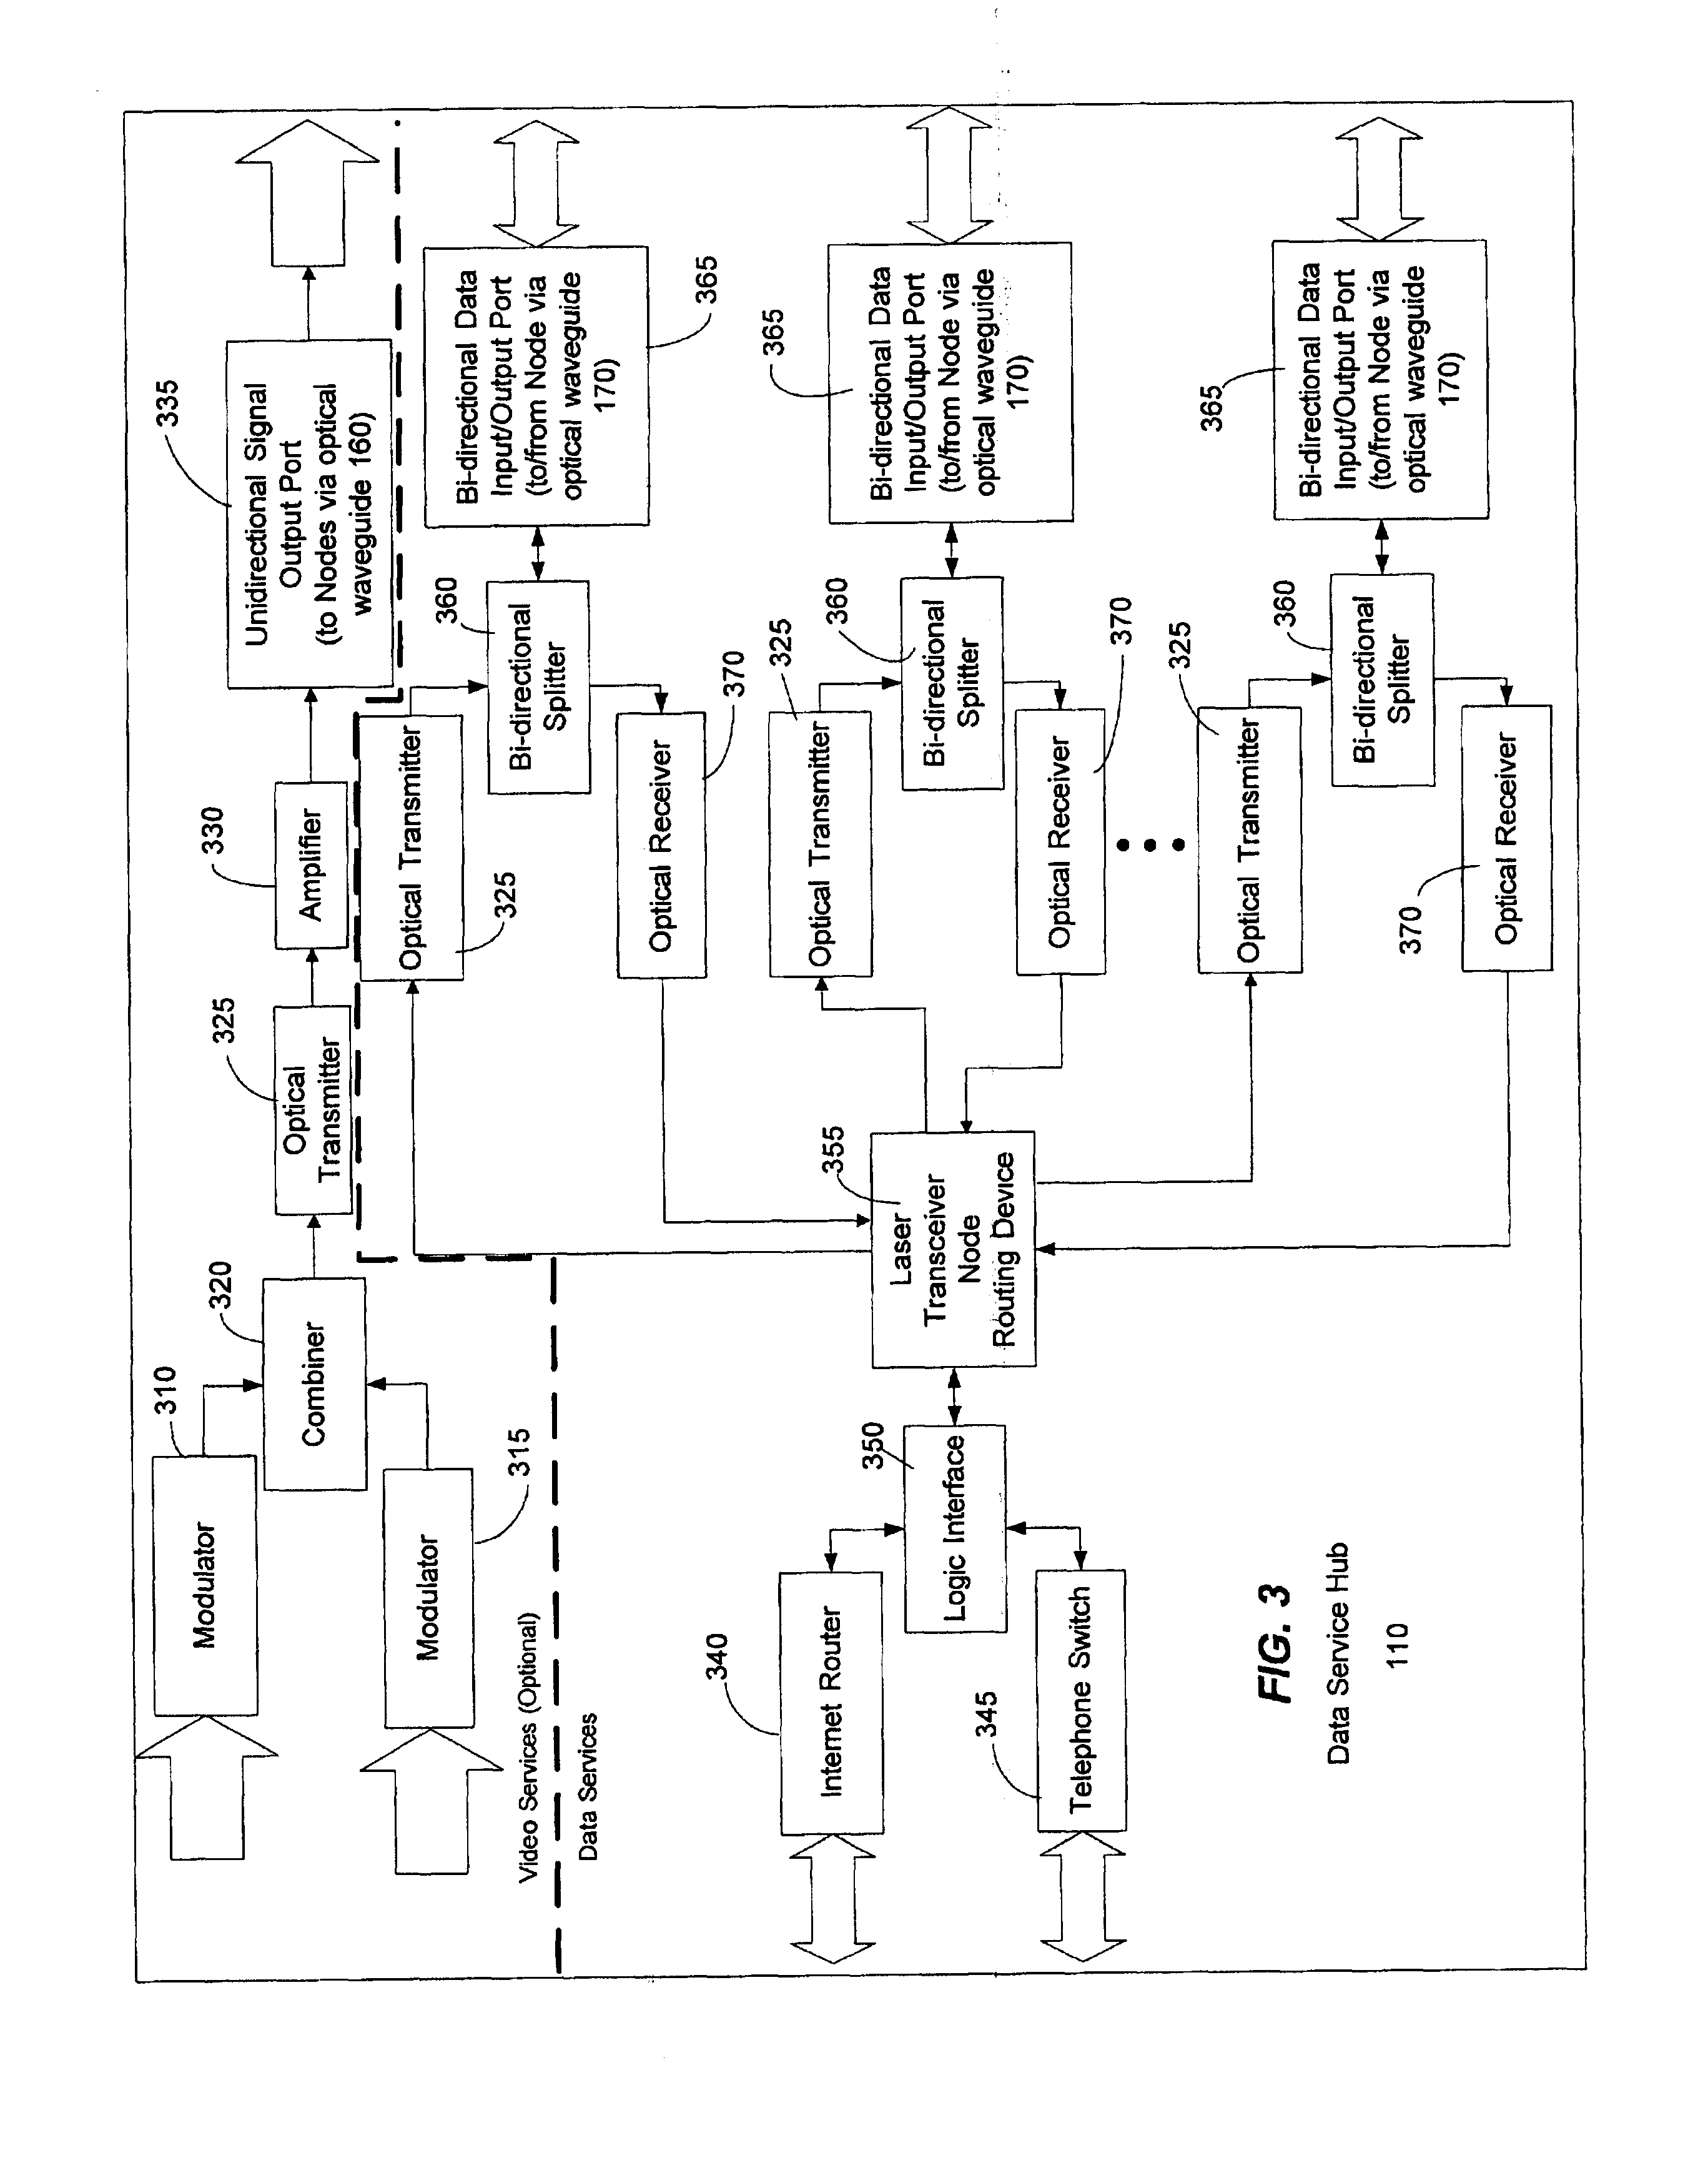 System and method for communicating optical signals between a data service provider and subscribers